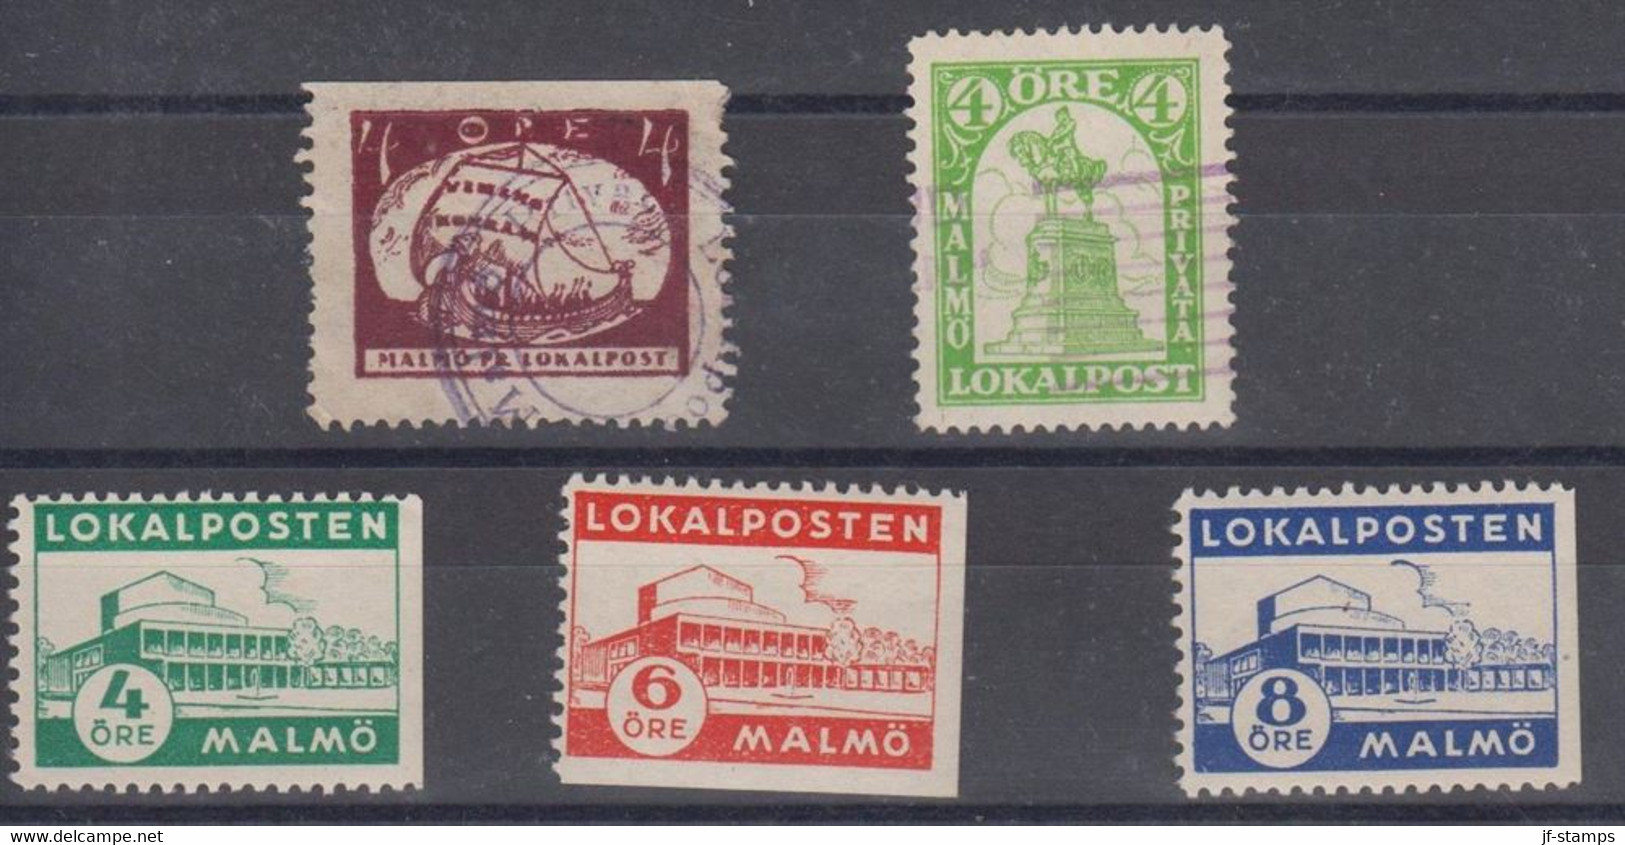 1926-1945. SVERIGE. MALMÖ LOKALPOST 2 Cancelled Stamps And LOKALPOSTEN MALMÖ 3 Never Hinged Stamps.  - JF520097 - Emissions Locales